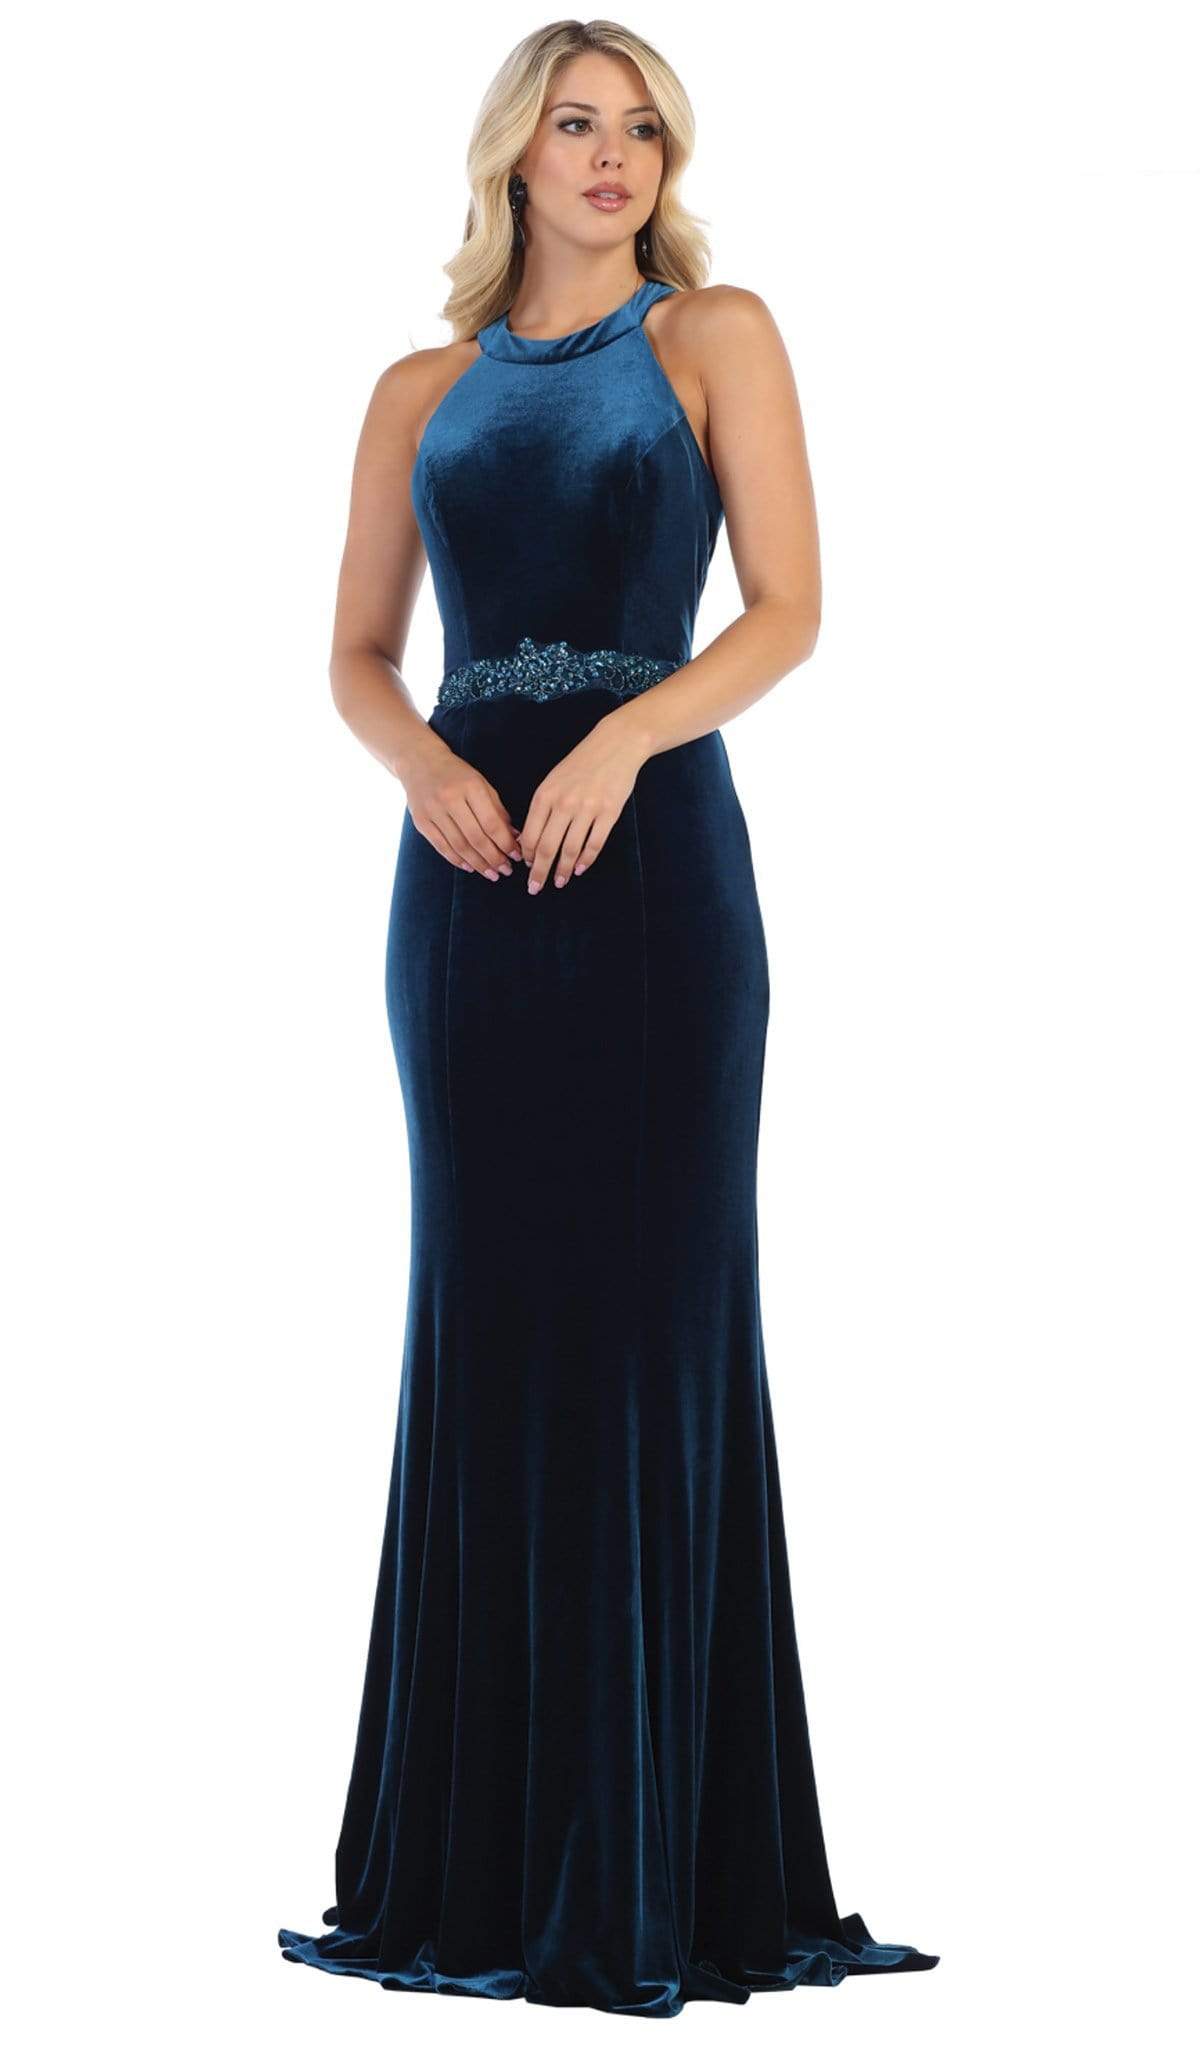 May Queen - RQ7652 Fitted Jewel Sheath Evening Dress Special Occasion Dress 4 / Teal-Blue